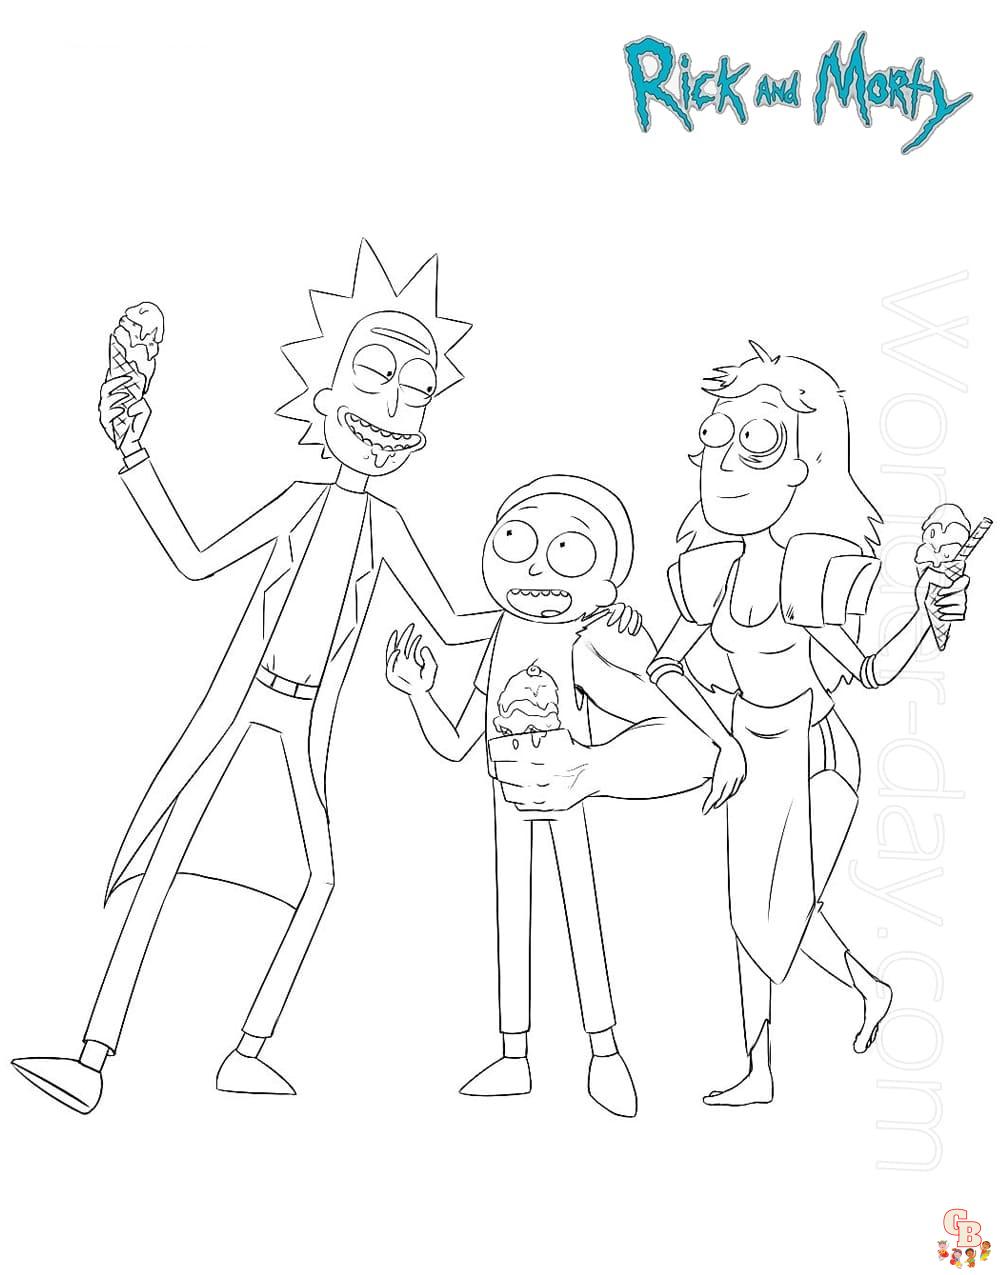 Rick and Morty Coloring Pages 5 1